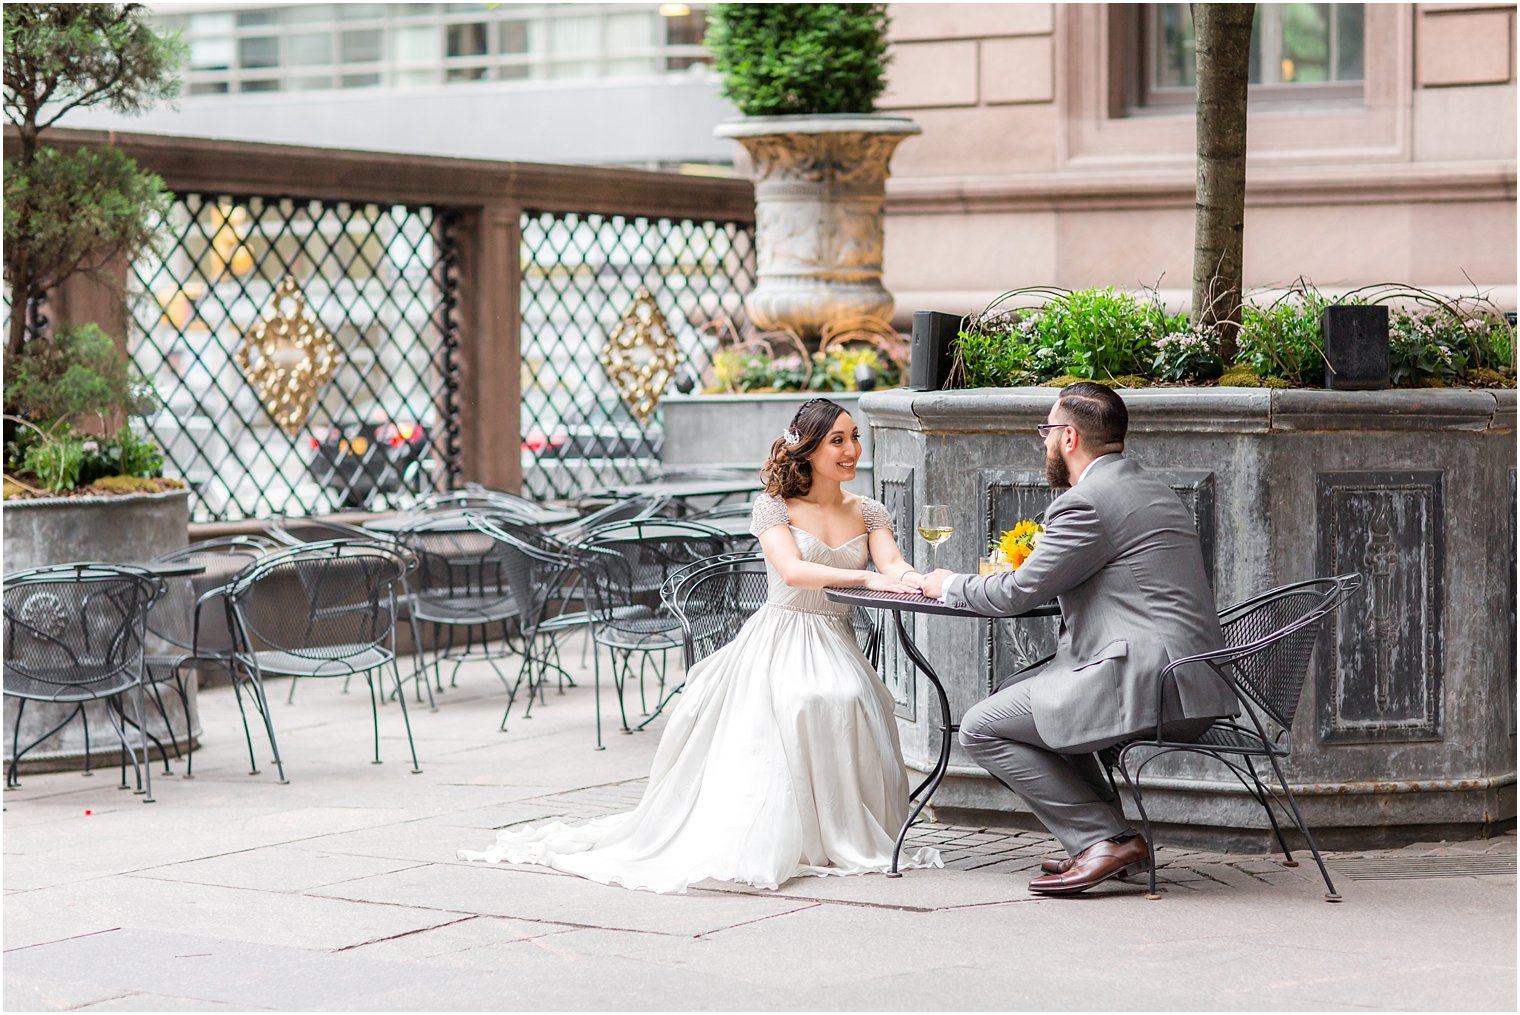 Bride and groom at New York Palace Hotel courtyard